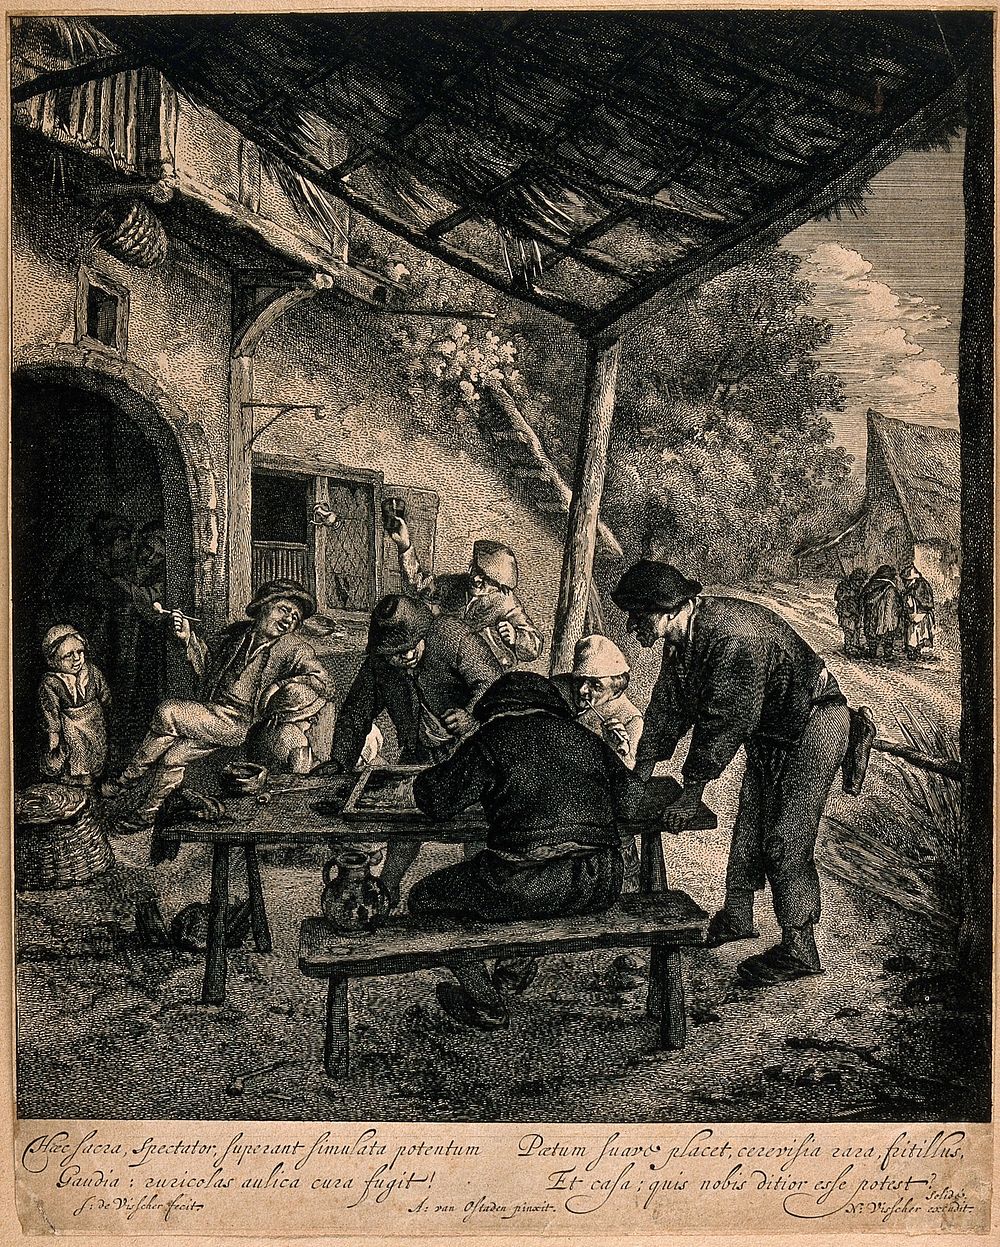 Men playing backgammon outside in an arbor, nearby others smoke and drink. Etching by J. de Visscher after A. van Ostade.